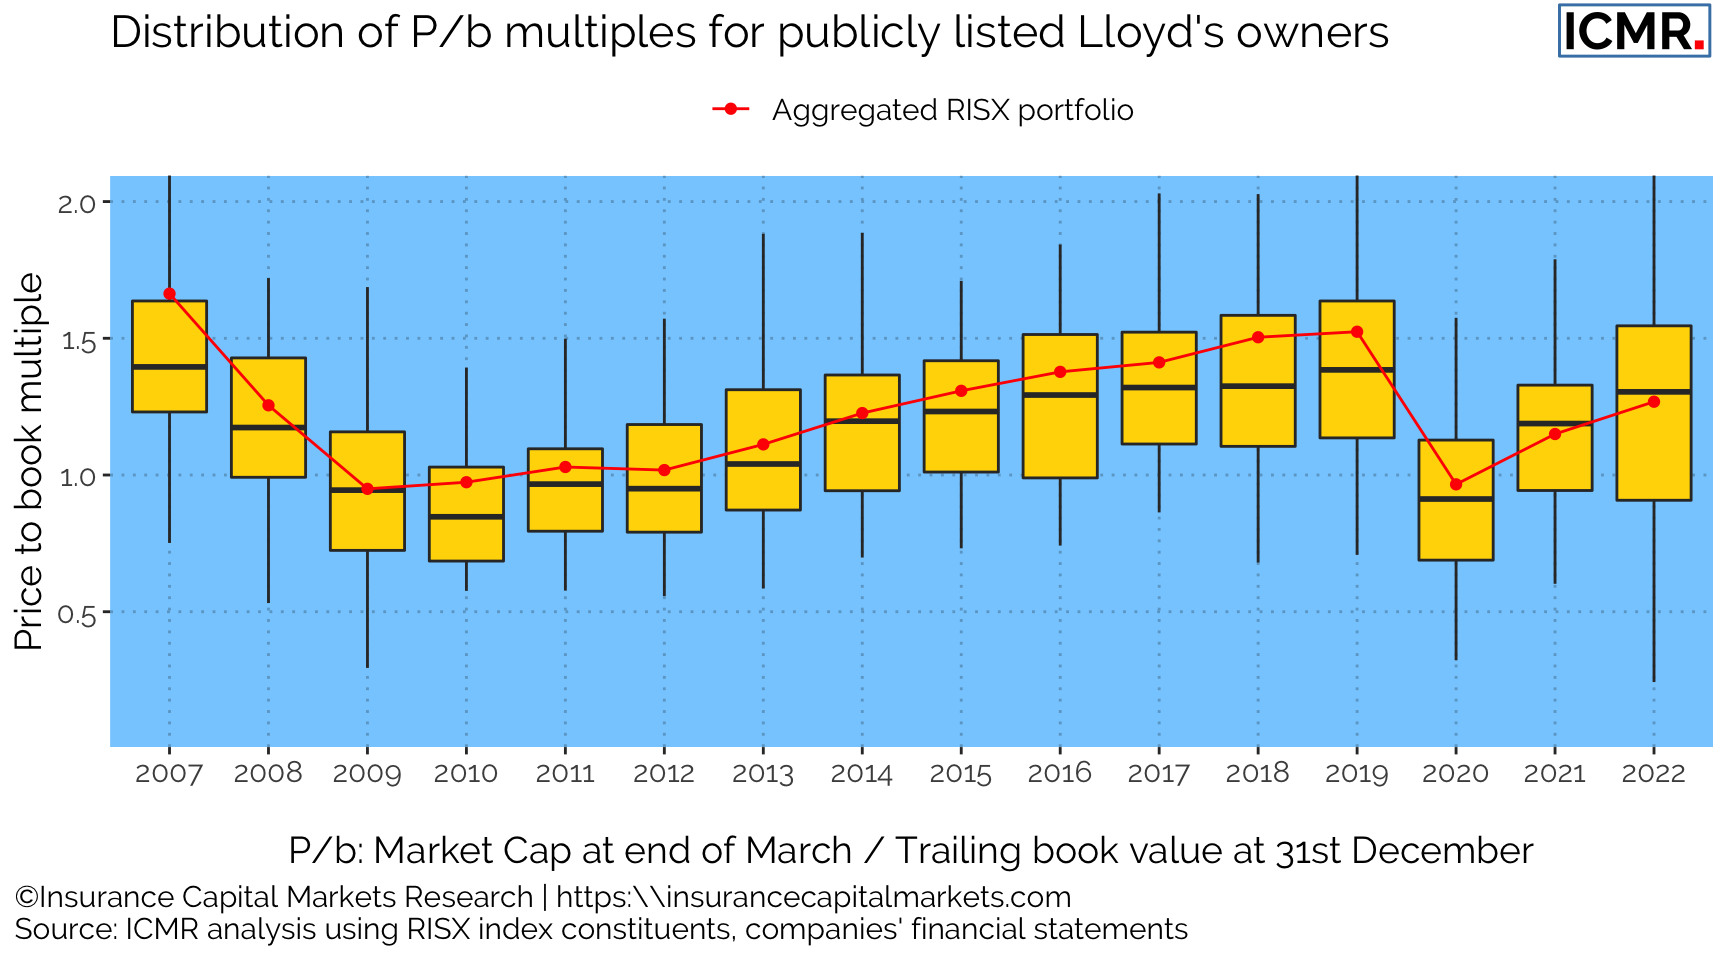 Price to book multiples of publicly listed global specialty (re)insurance companies with Lloyd's business. P/b multiple measured at end of March in each year against the companies' trailing book value.